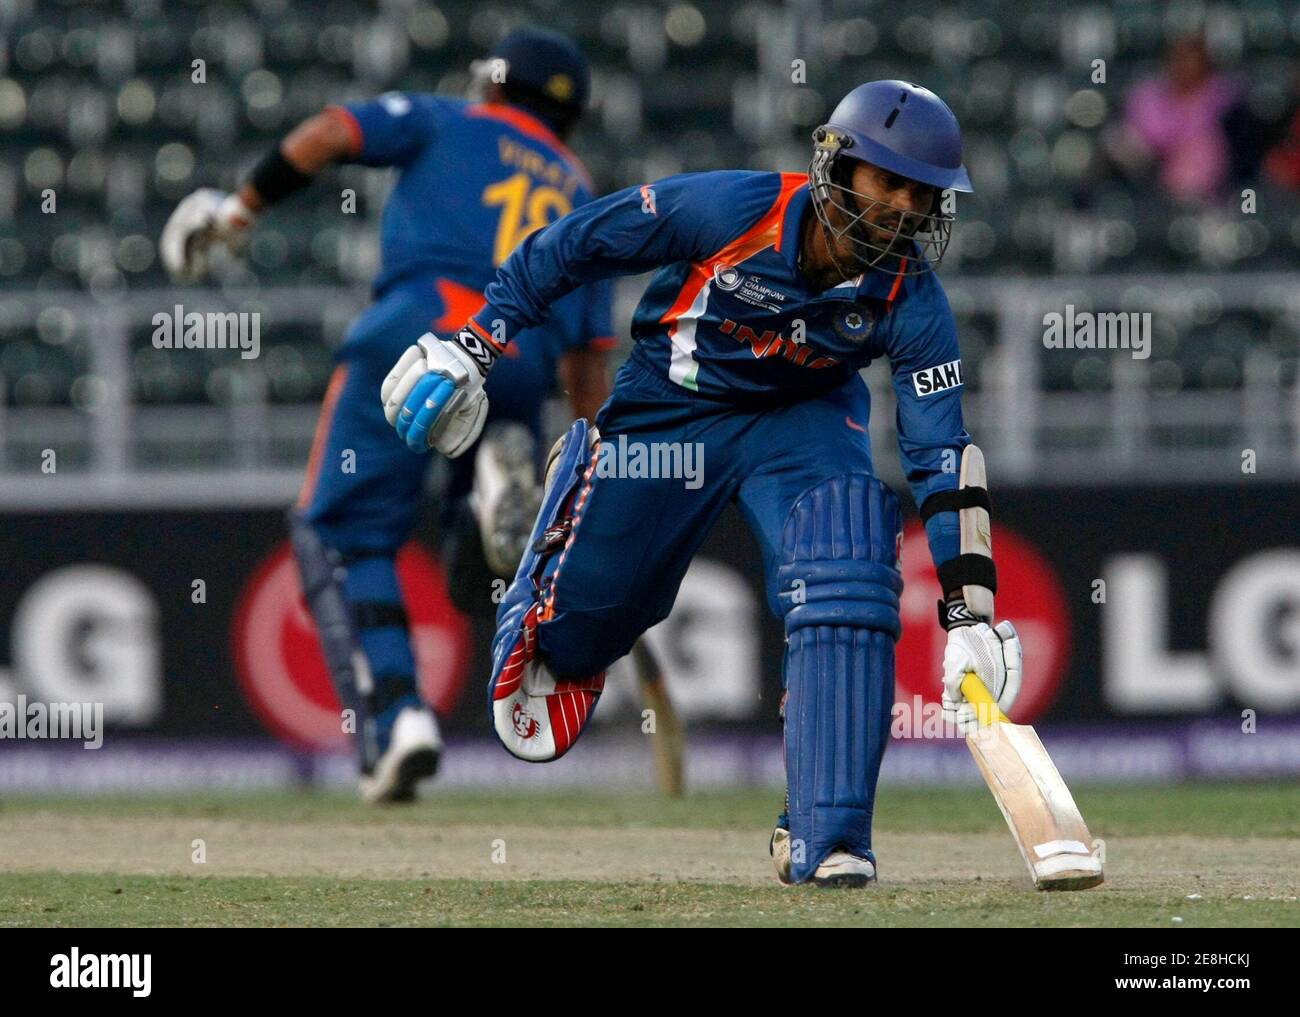 India's Dinesh Karthik runs between the wickets during their ICC Champions Trophy cricket match against the West Indies in Johannesburg, September 30, 2009. REUTERS/Mike Hutchings (SOUTH AFRICA SPORT CRICKET) Stock Photo